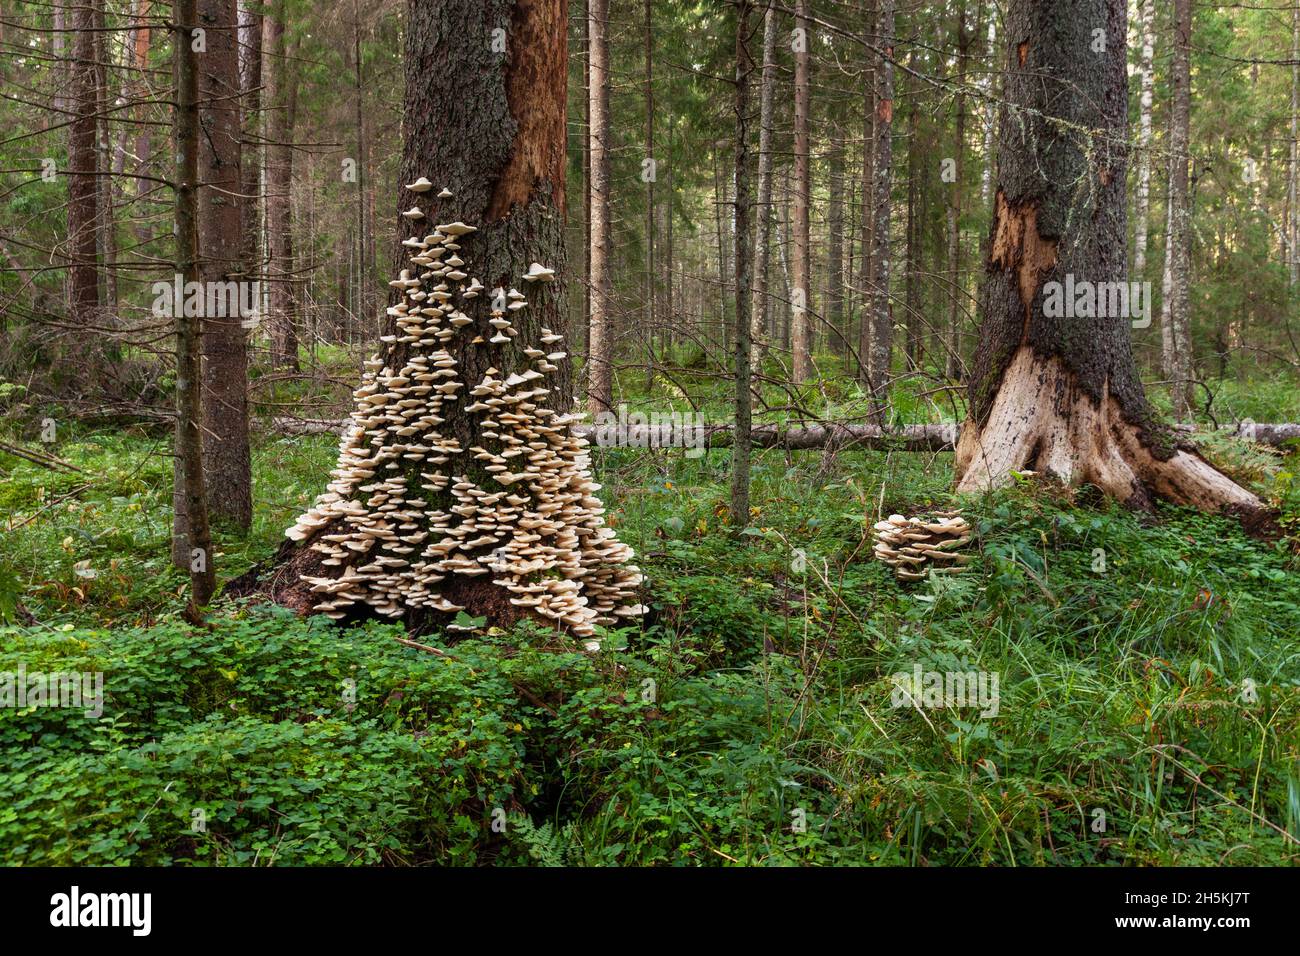 Poroid fungus Climacocystis borealis growing massively on an old standing Spruce tree in an old-growth forest in Estonia, Northern Europe. Stock Photo